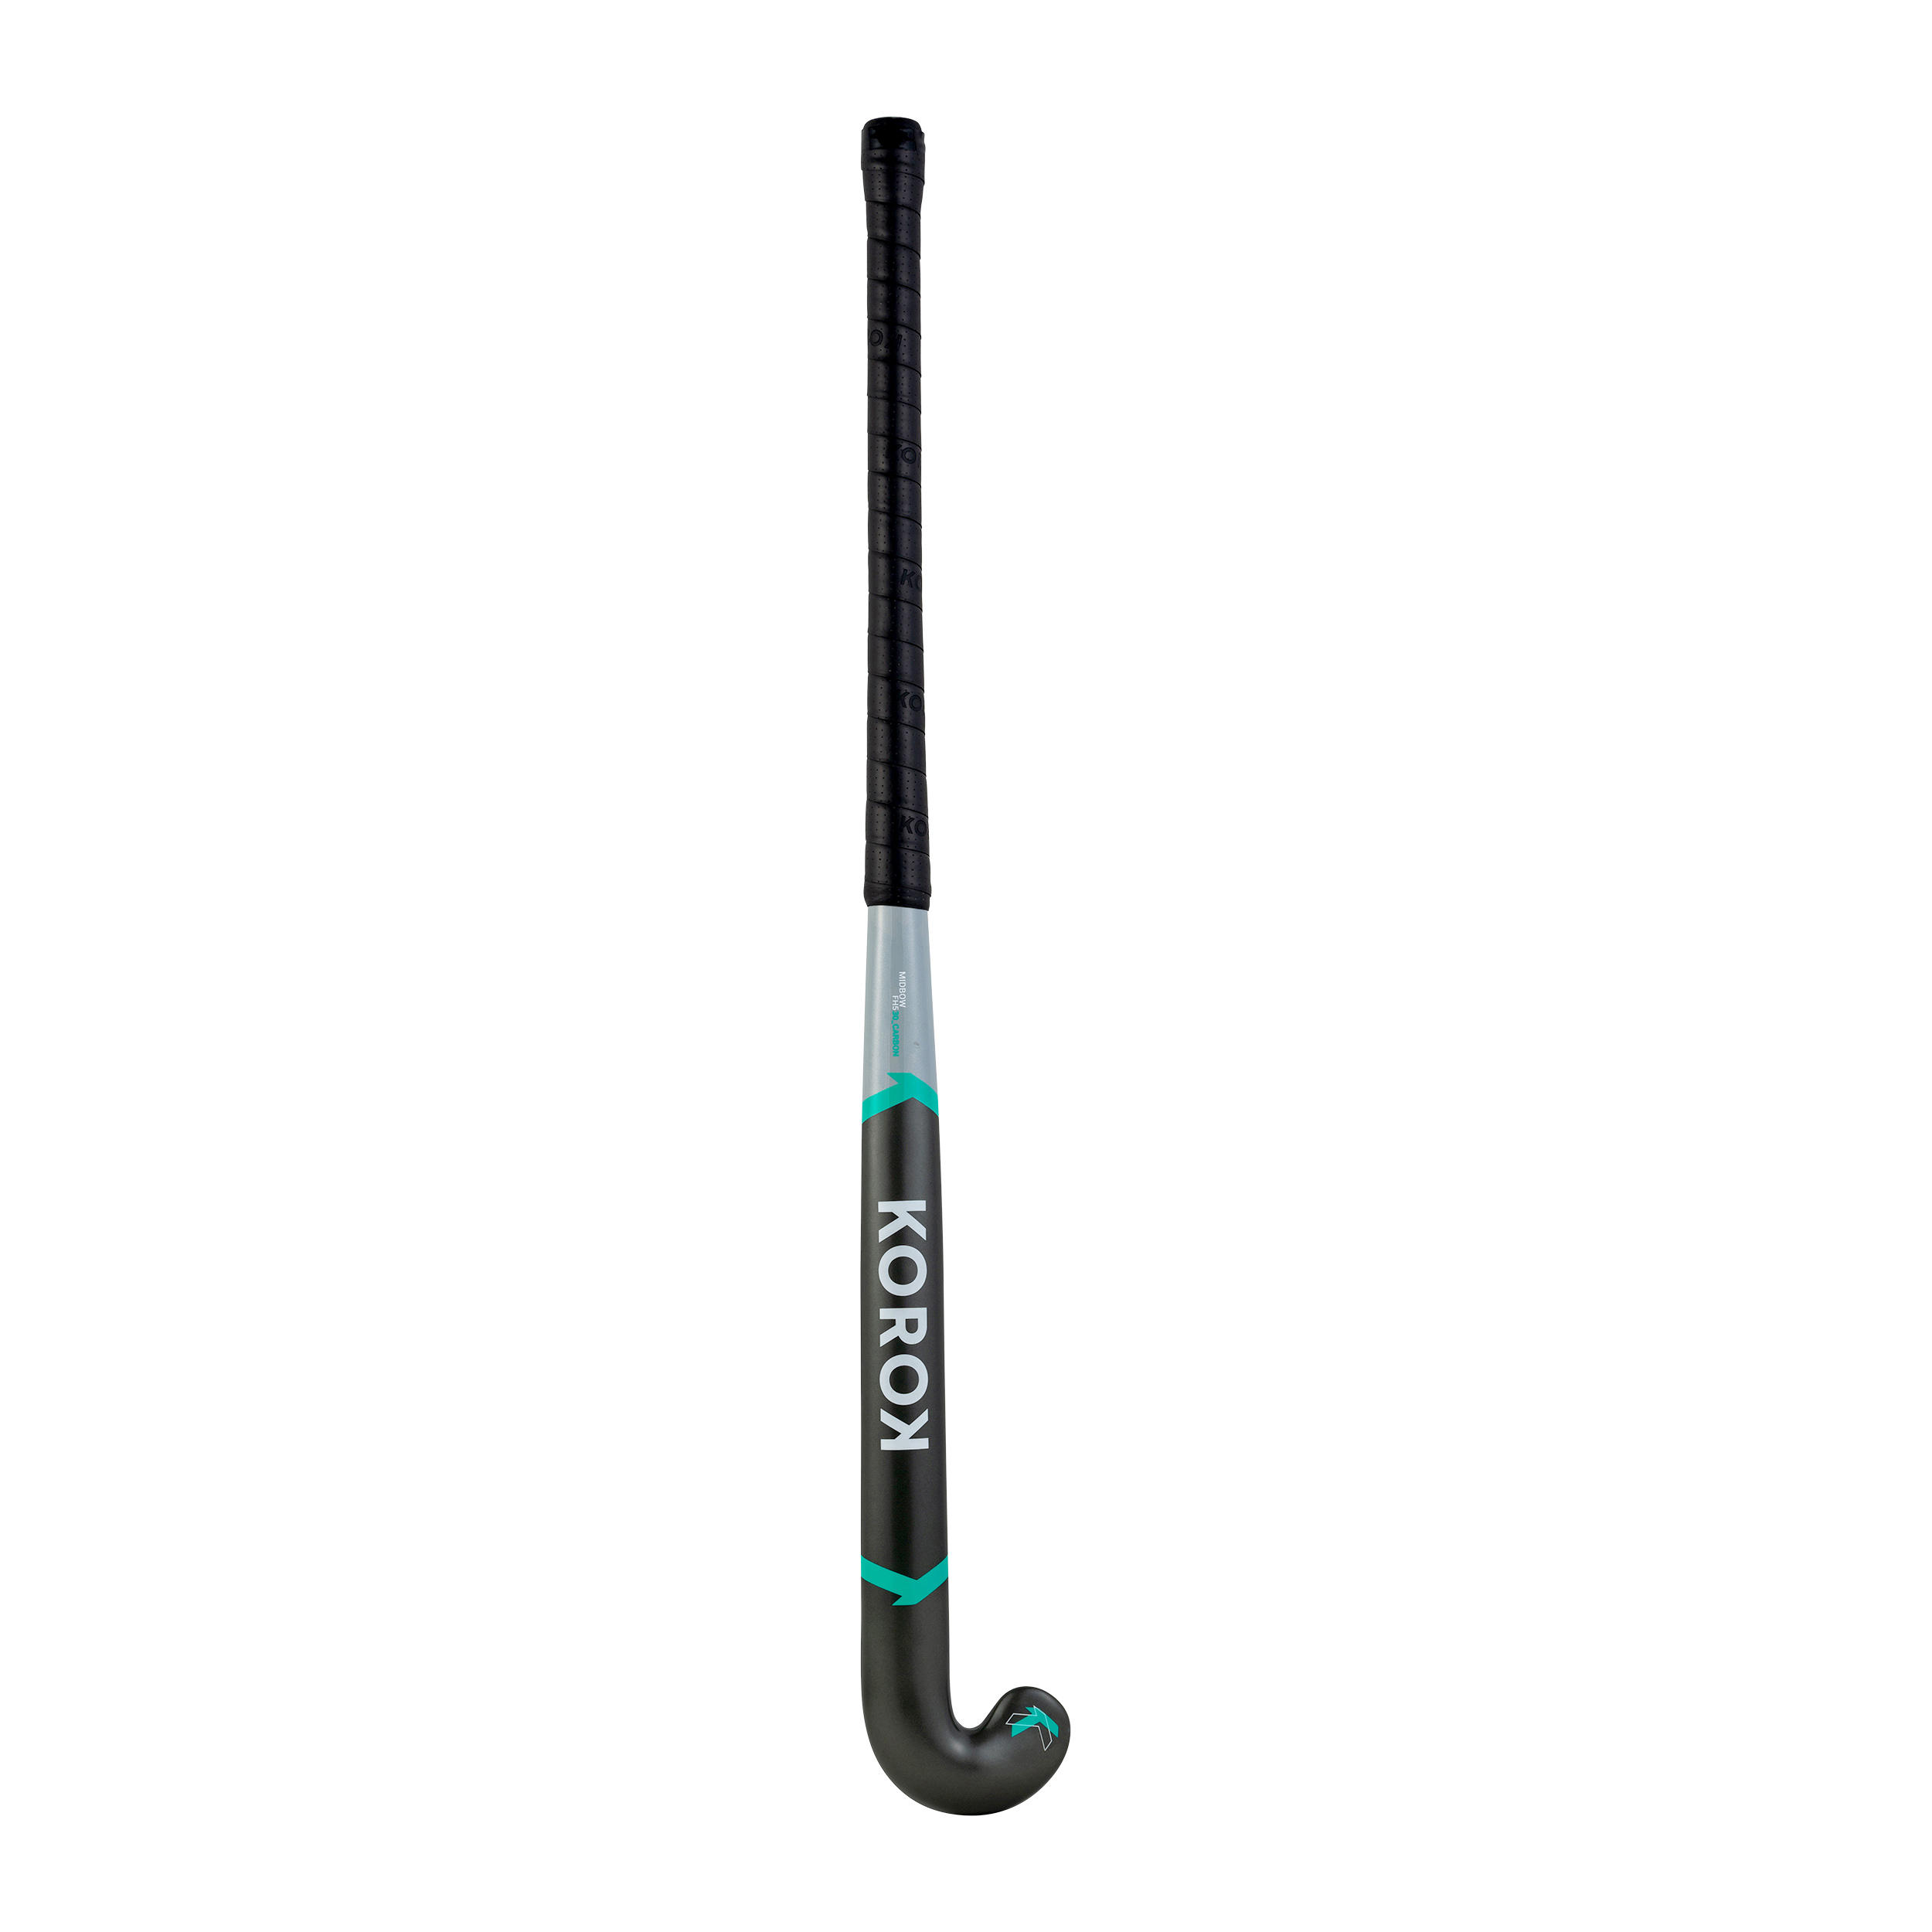 Adult Intermediate 30% Carbon Mid Bow Field Hockey Stick FH530 - Grey/Turquoise 7/12